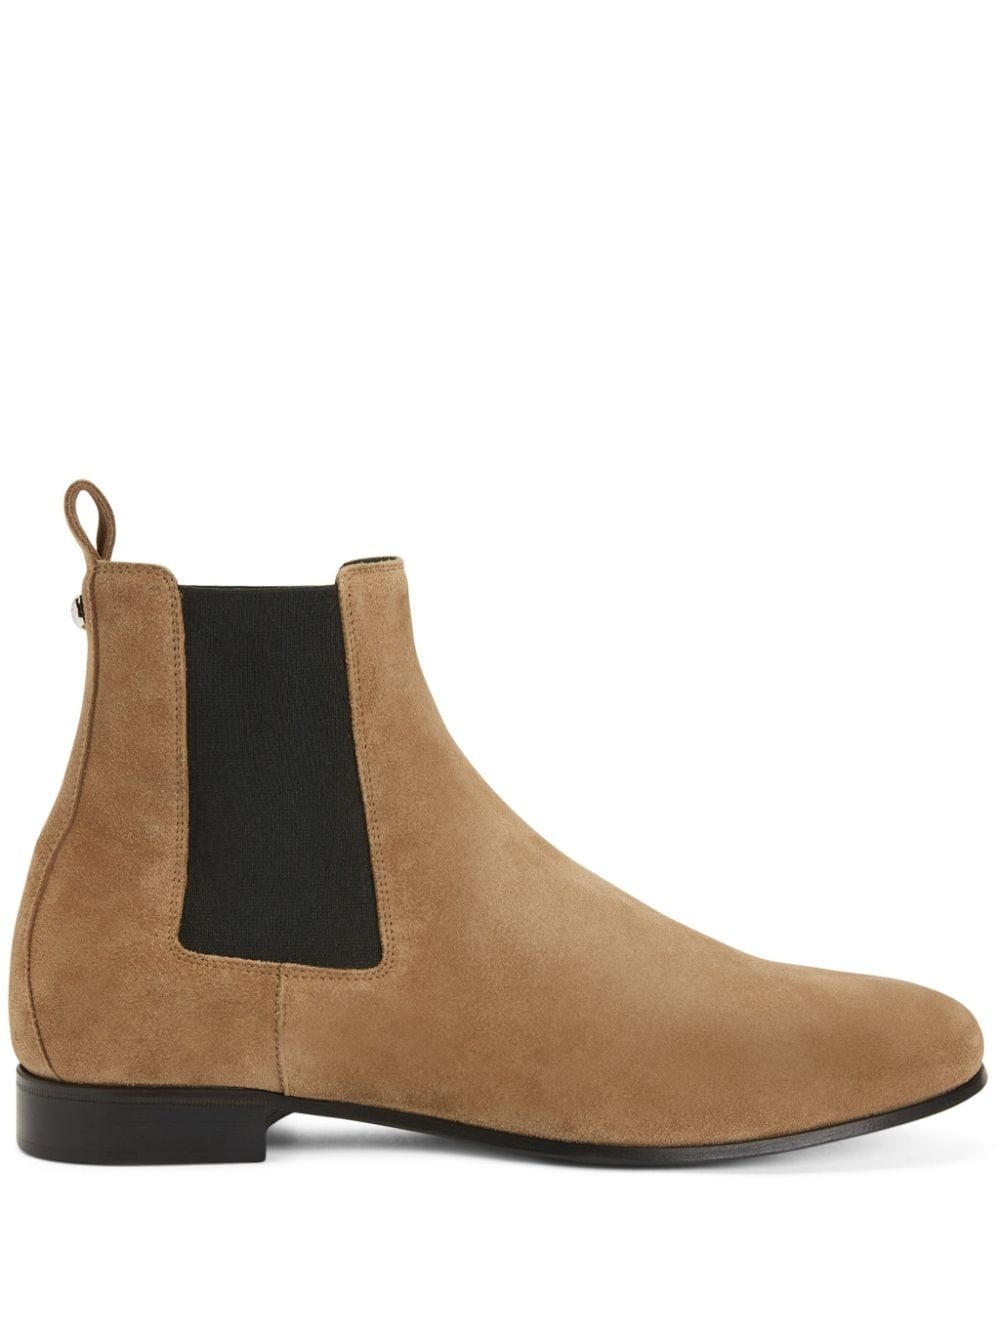 Eligio suede ankle boots - 1